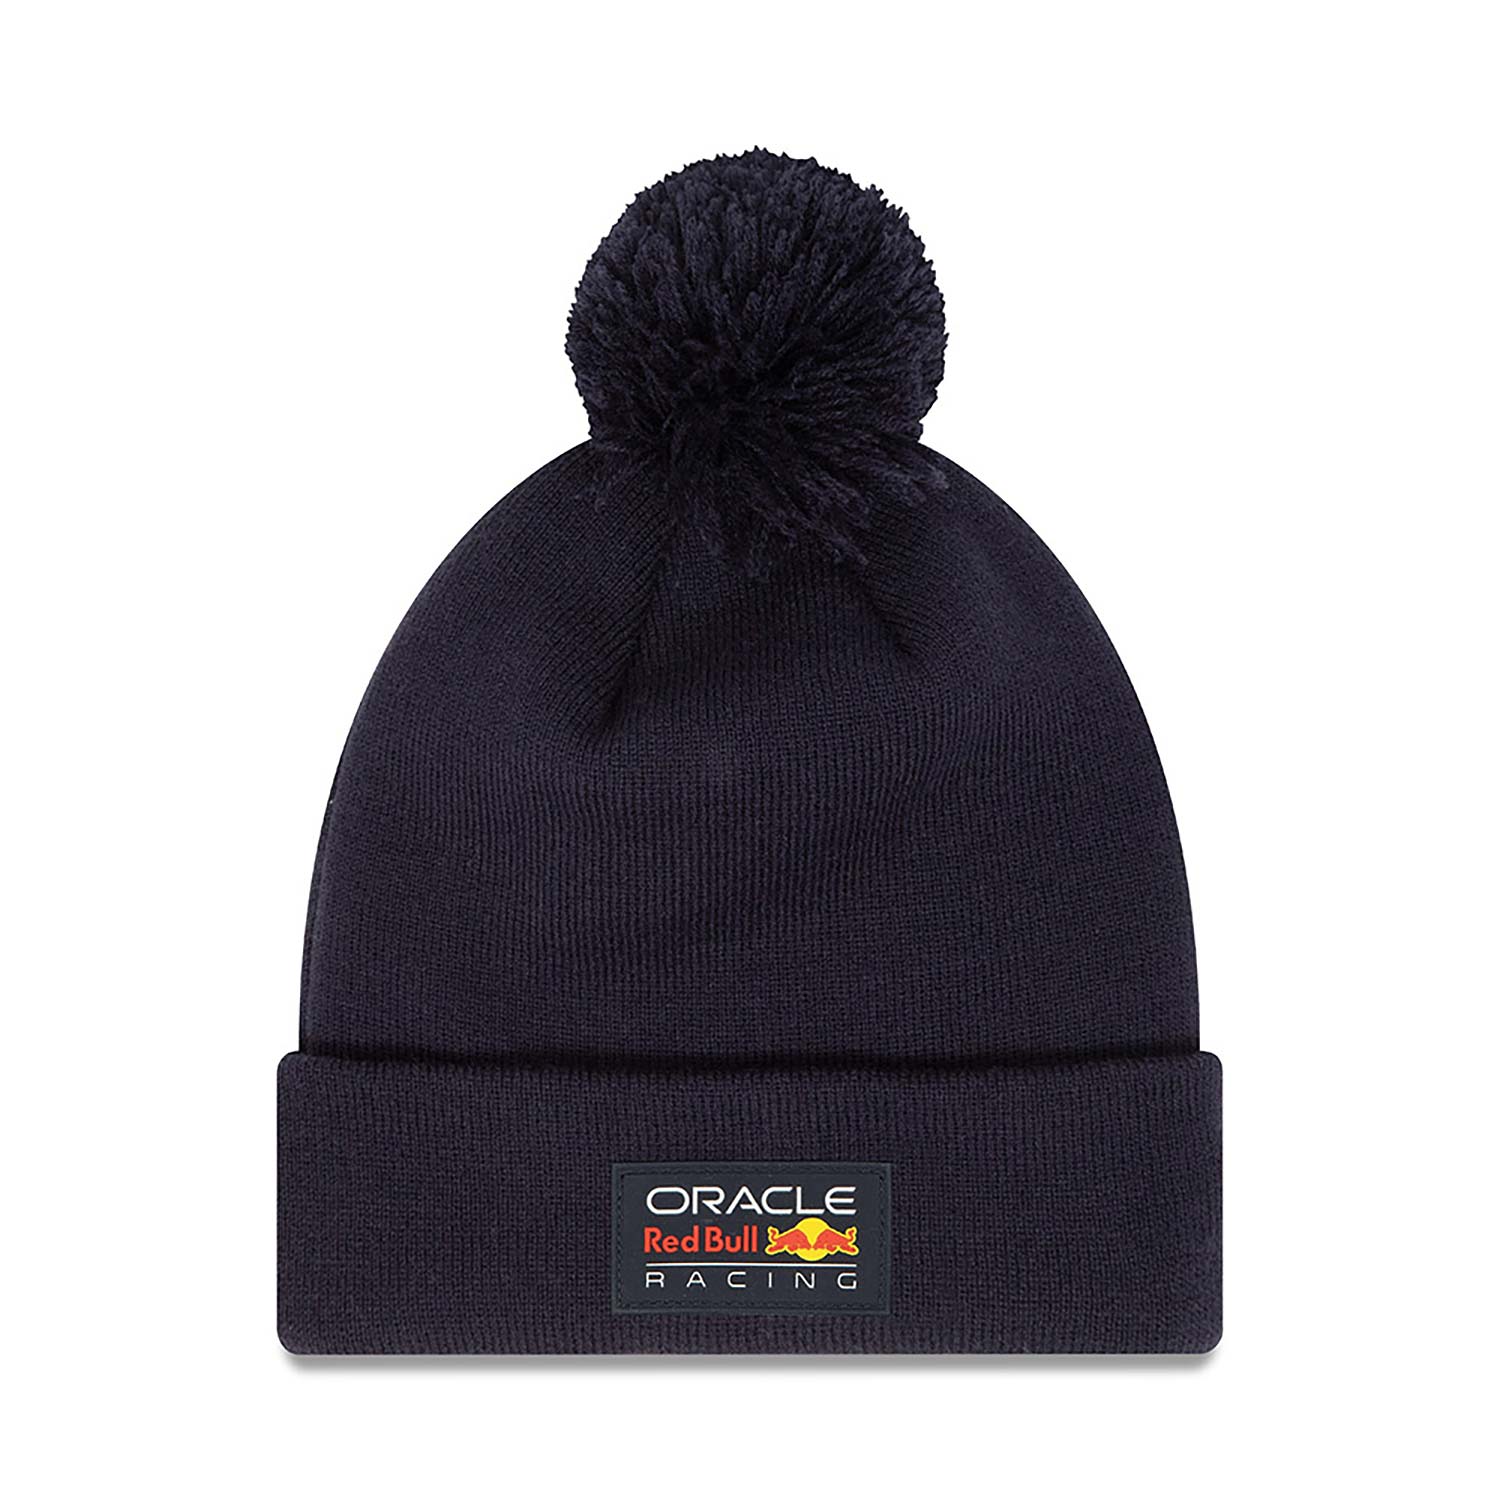 Red Bull Essential Blue Bobble Knit Beanie Hat